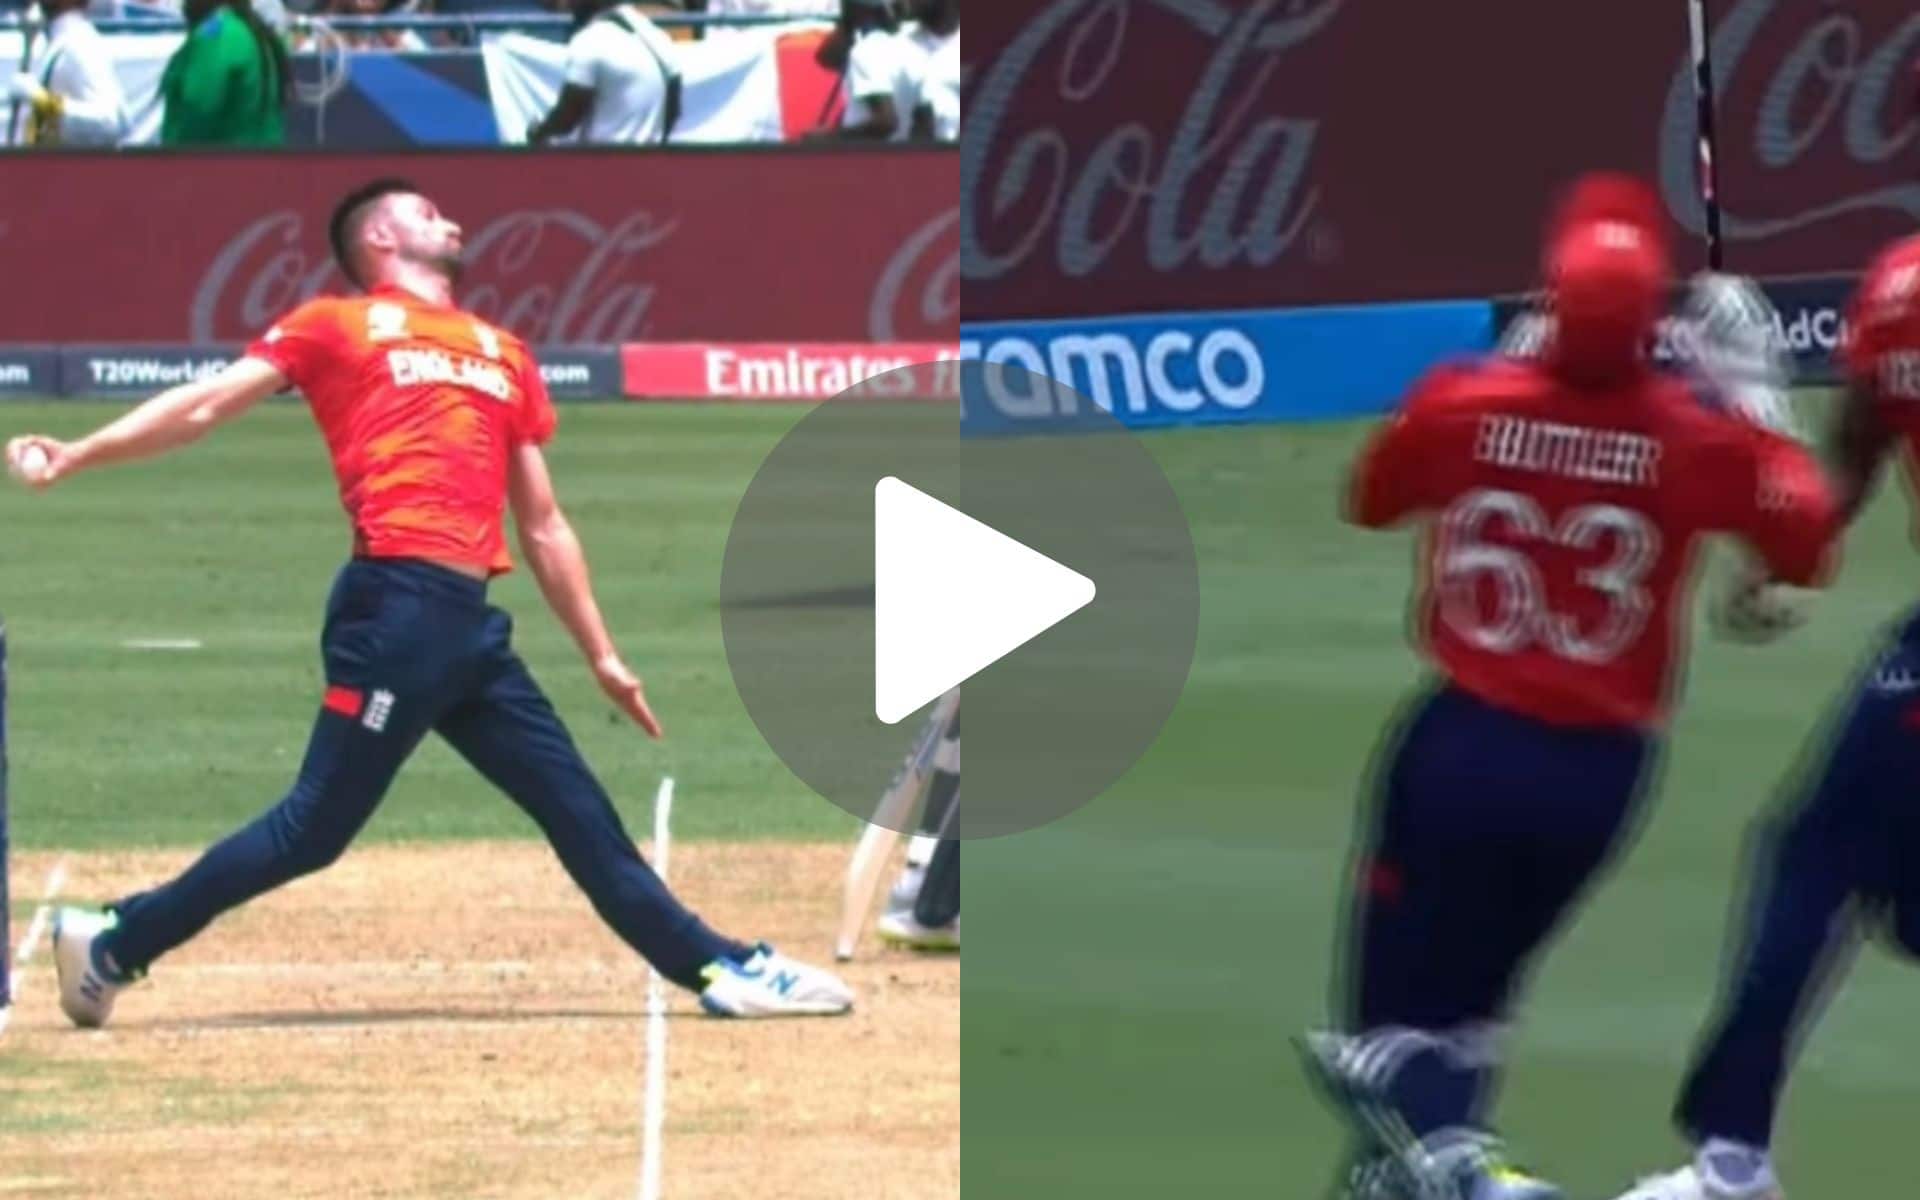 [Watch] Mark Wood's 'Wild No-Ball' Ruins Buttler's Brilliant Back-Tracking Catch As Munsey Survives